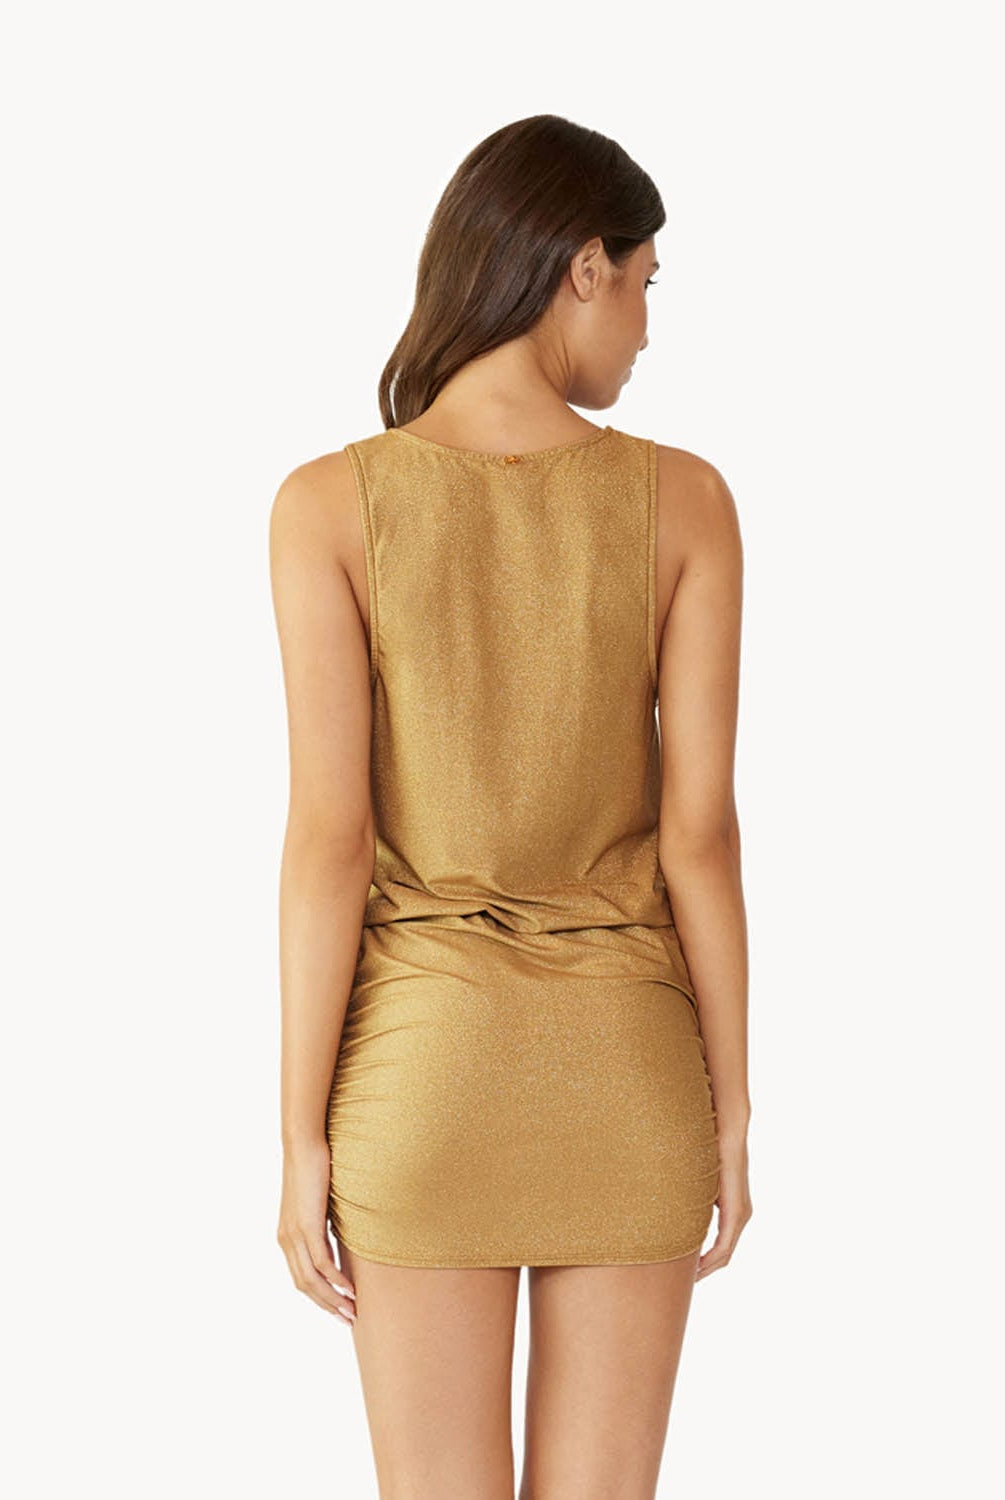 Brunette woman wearing a gold short coverup dress with front tie detail facing backwards towards white wall.